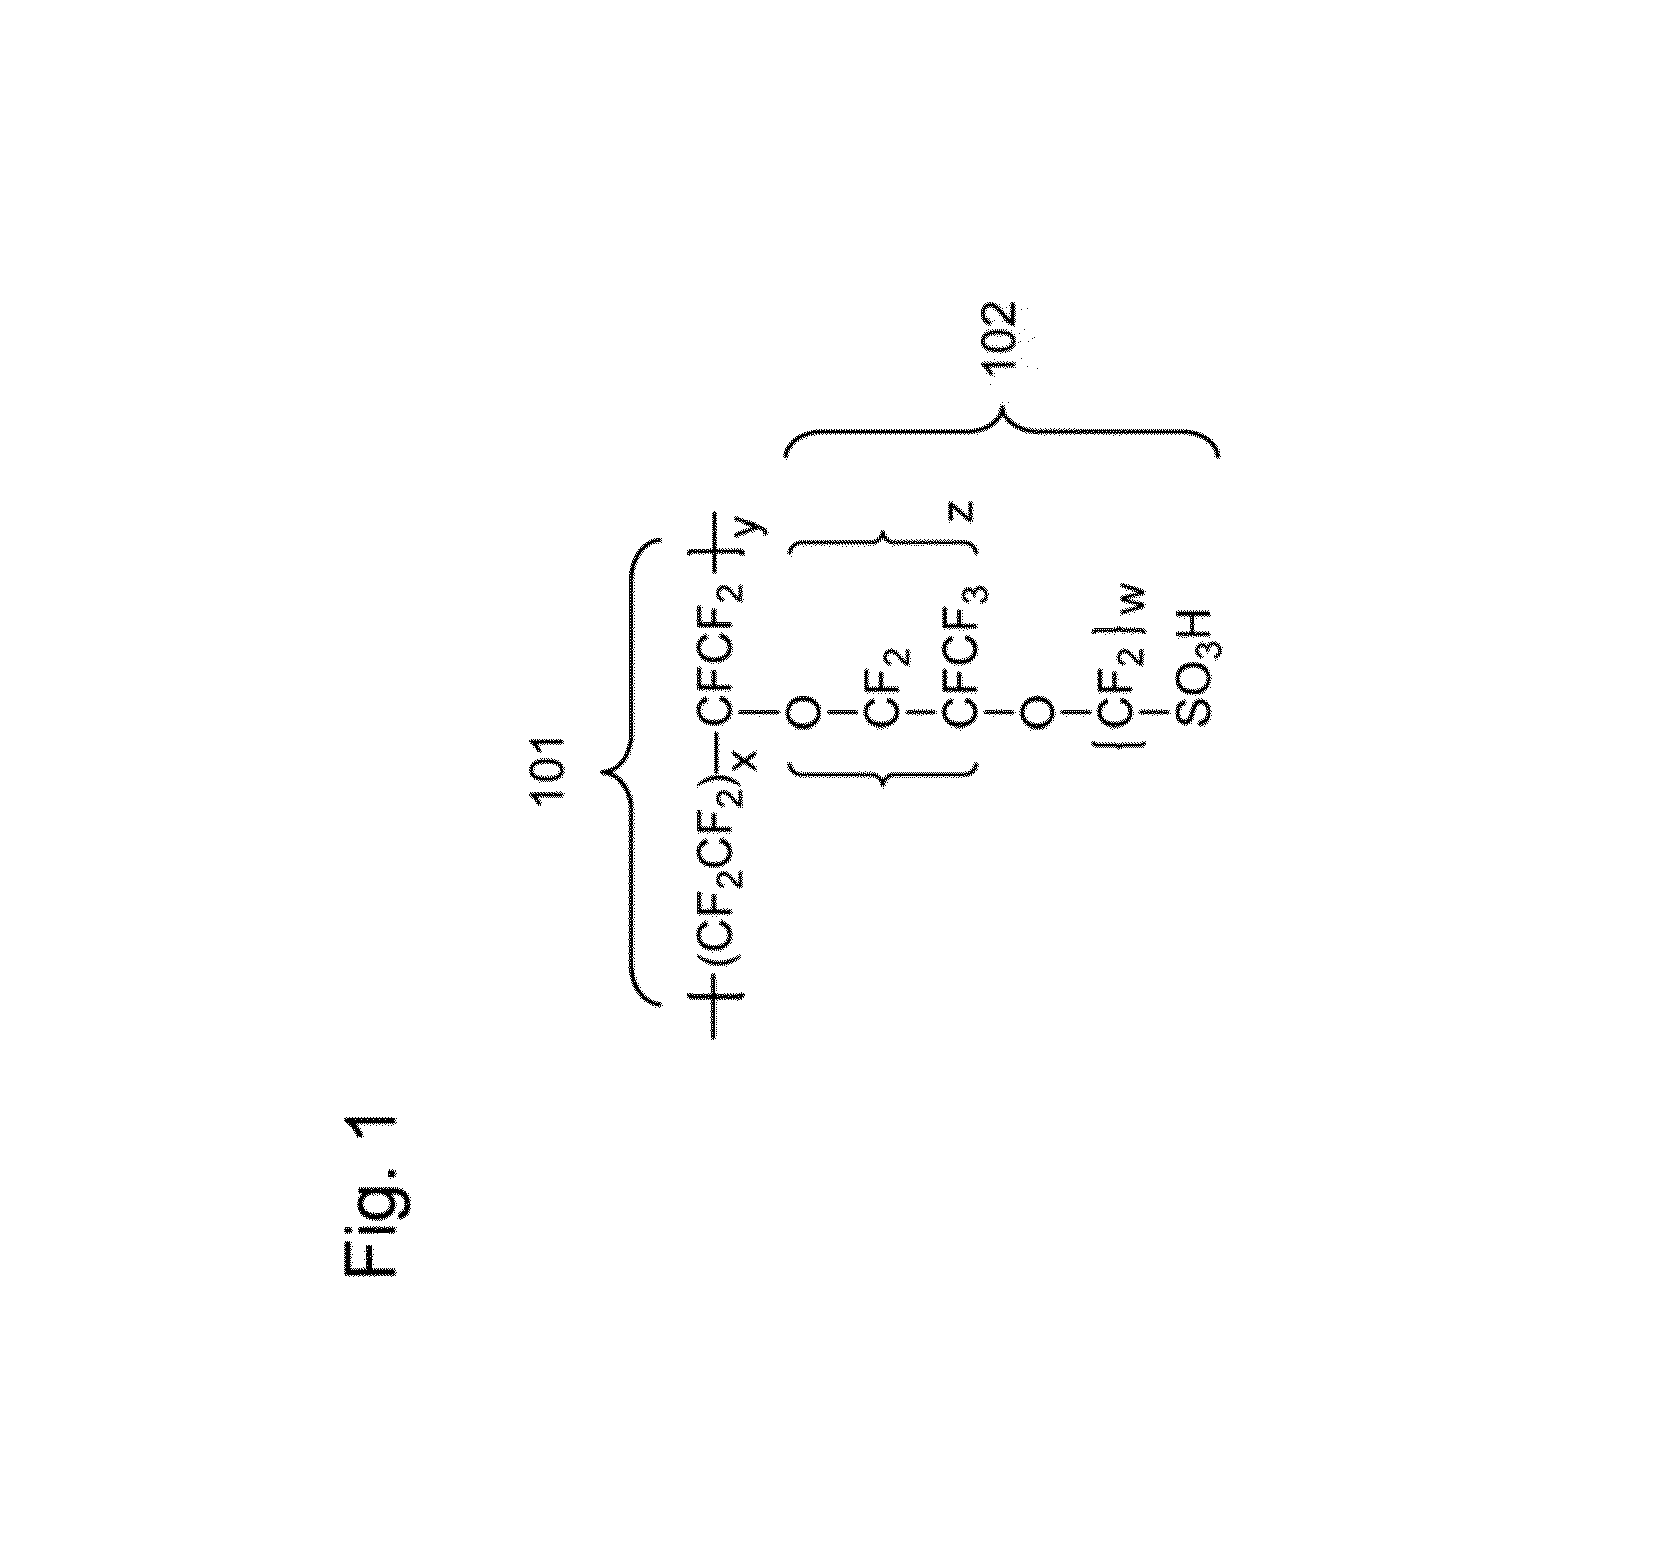 Method of fabricating a perfluorosulfonated ionomer membrane with a molecular alignment